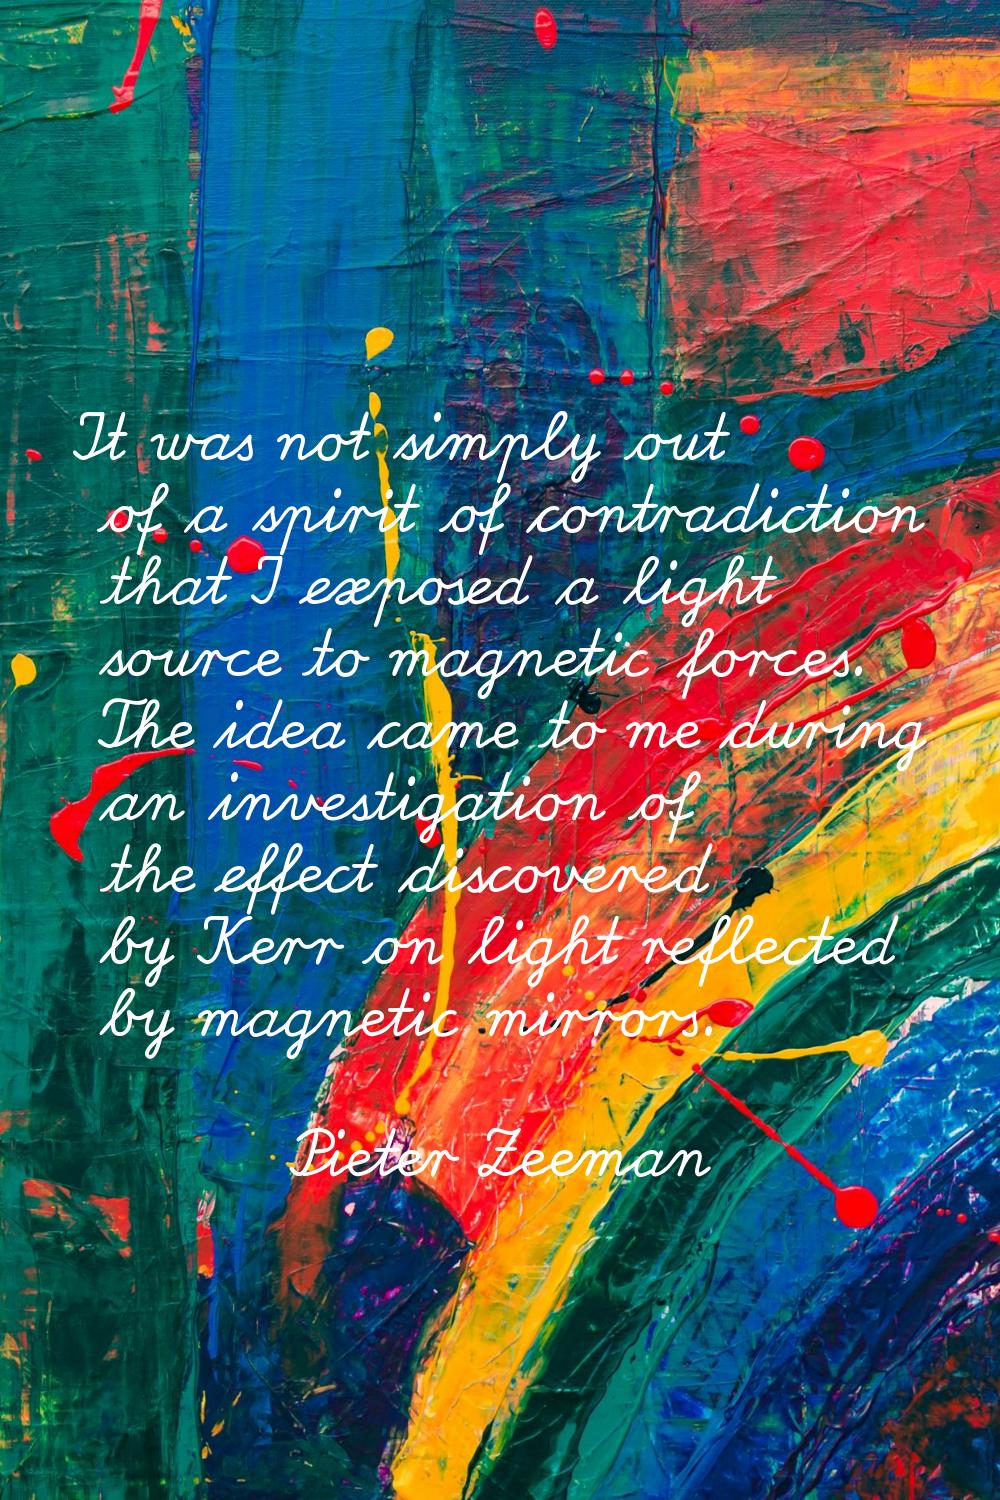 It was not simply out of a spirit of contradiction that I exposed a light source to magnetic forces